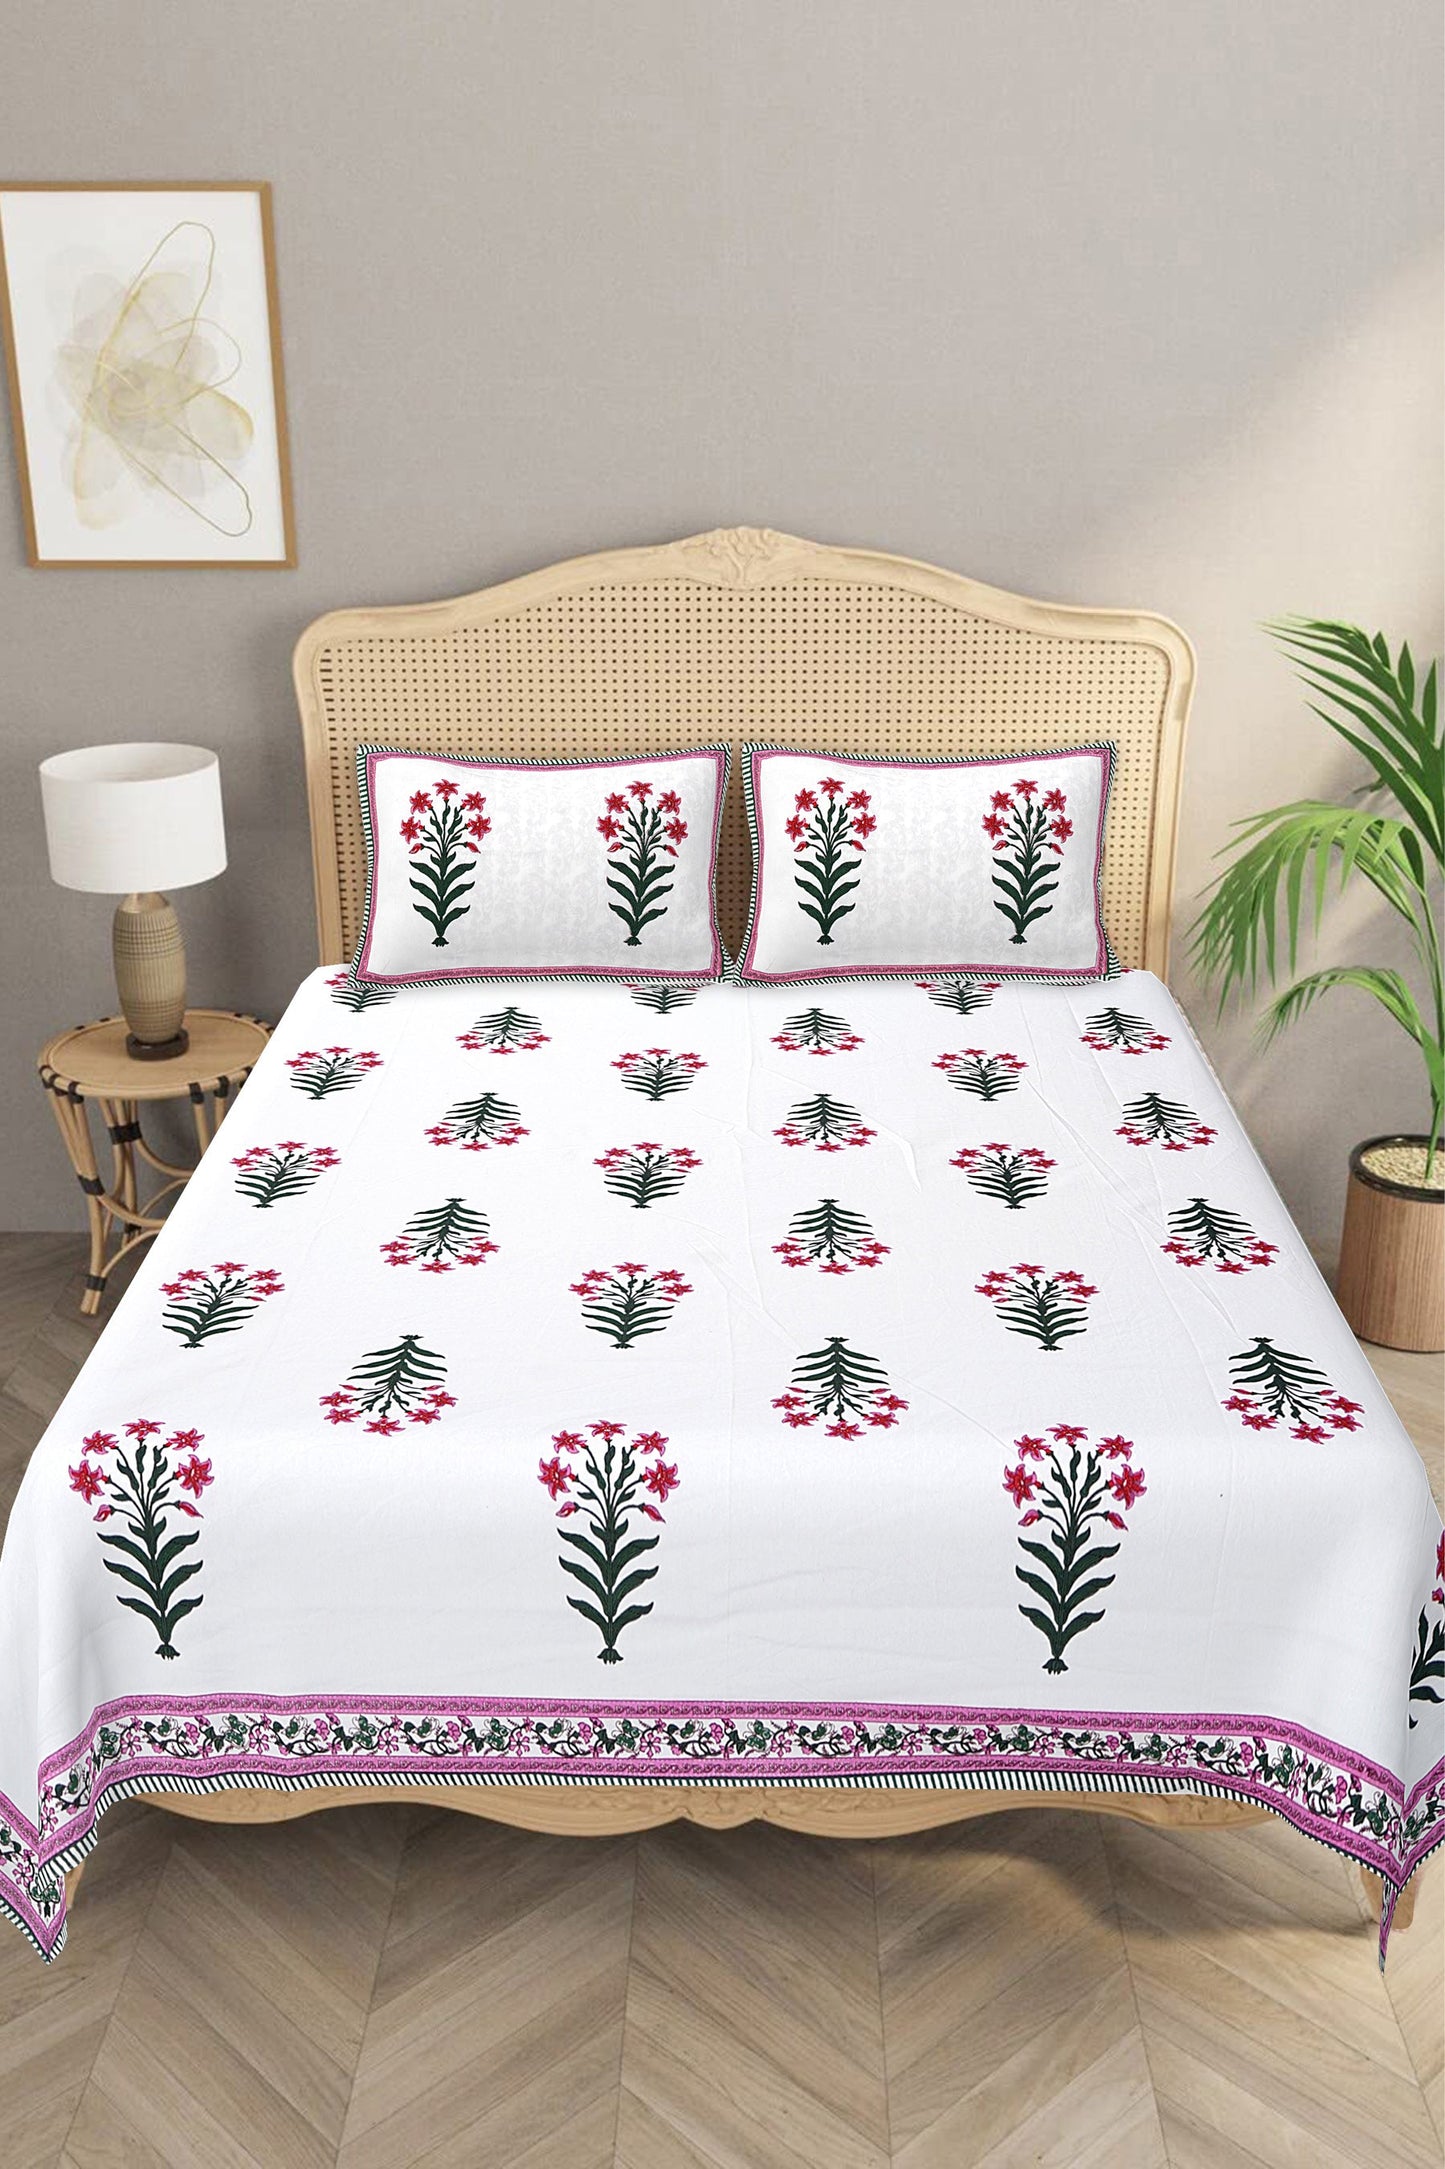 Beautiful Ethnic Motifs - Designs from Mughal Gardens - Handcrafted Pink Mughal Printed Double Bed Sheet with 2 Pillow Covers